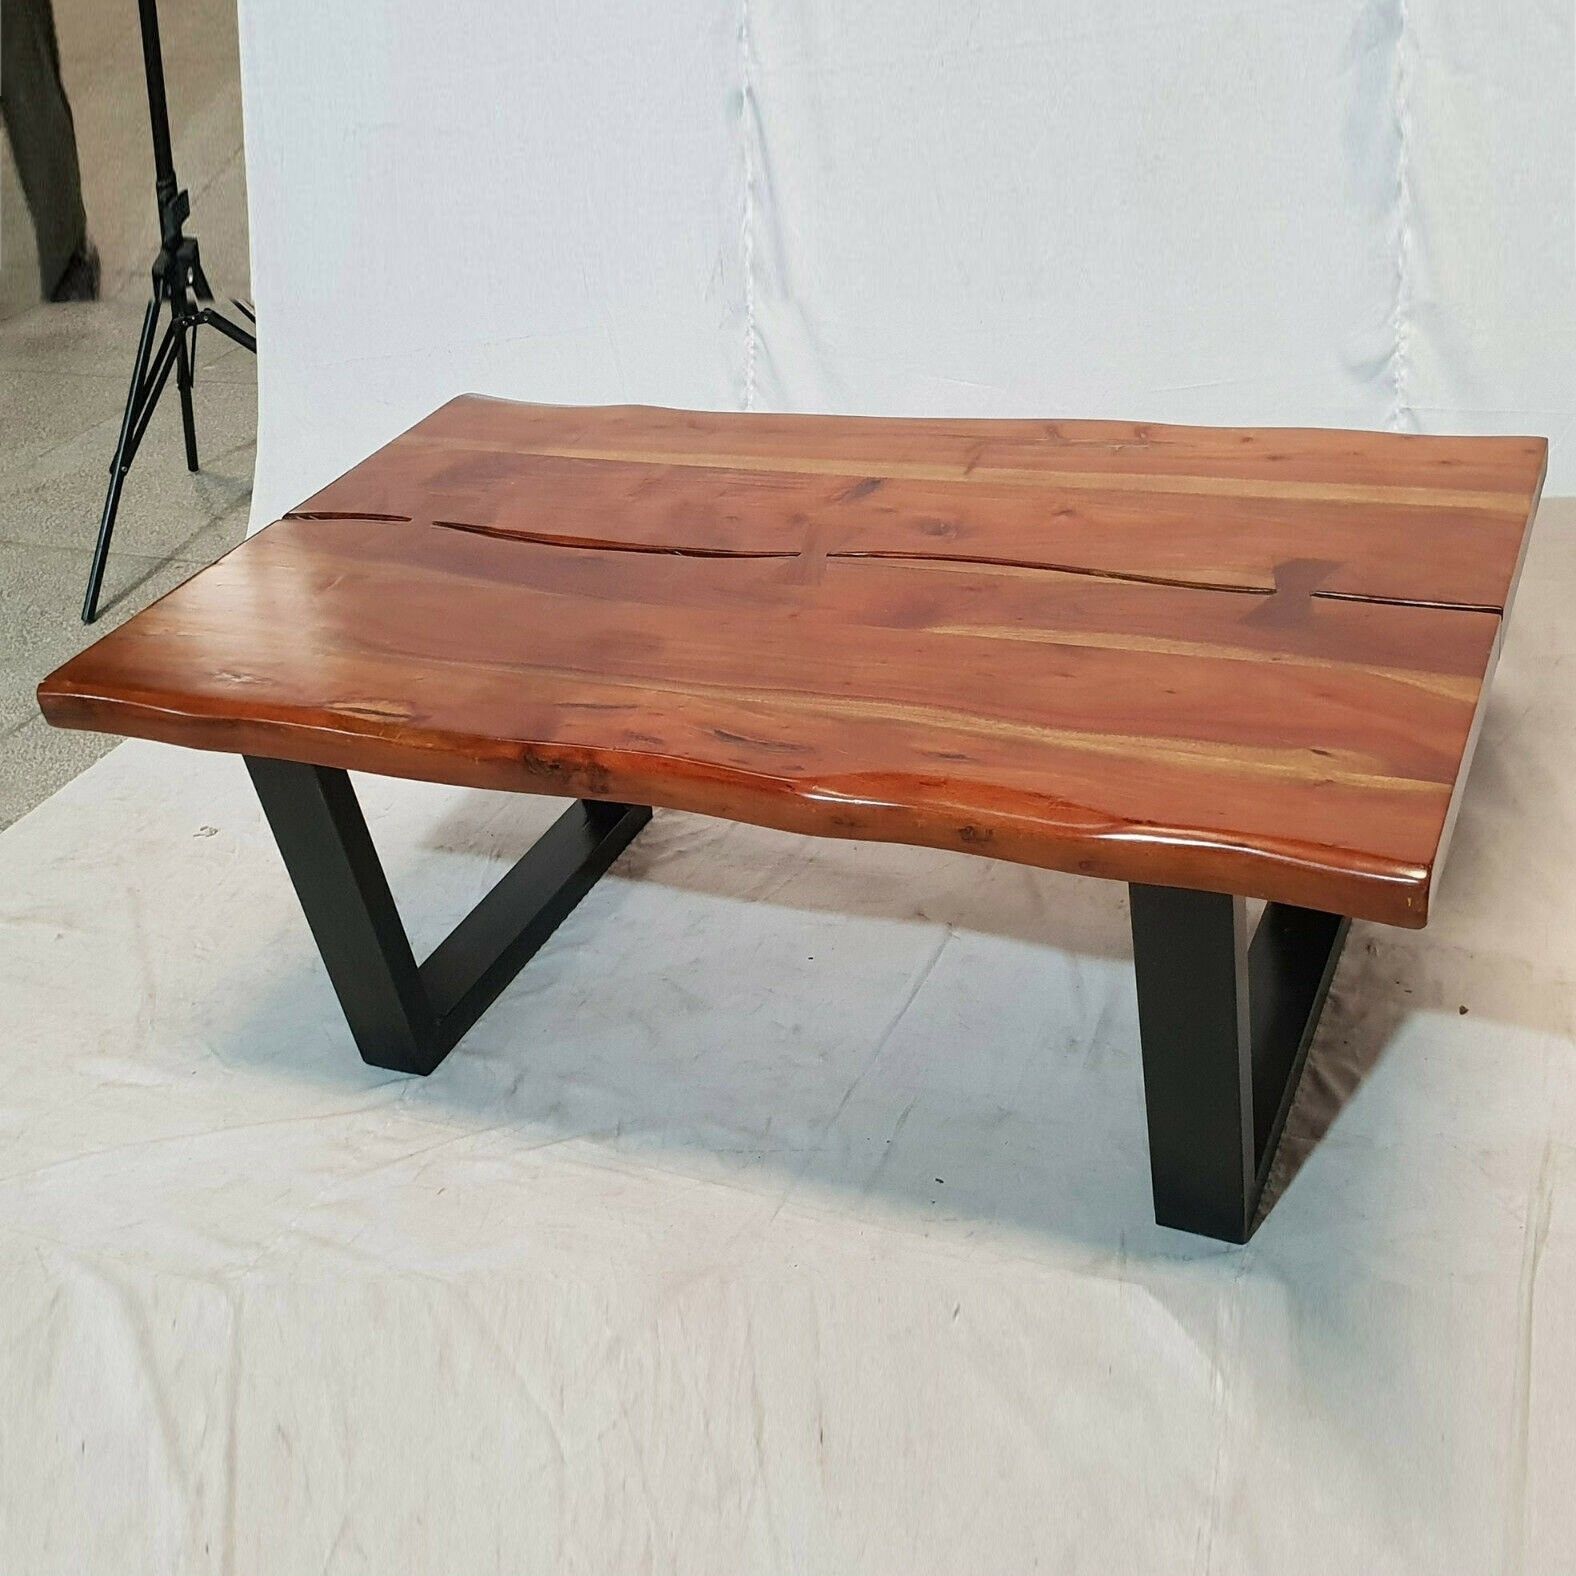 Solid Acacia Wood Live Edge Coffee Table Industrial Metal Legs 122 X 76cm Throughout Acacia Wood Coffee Tables (Gallery 20 of 20)